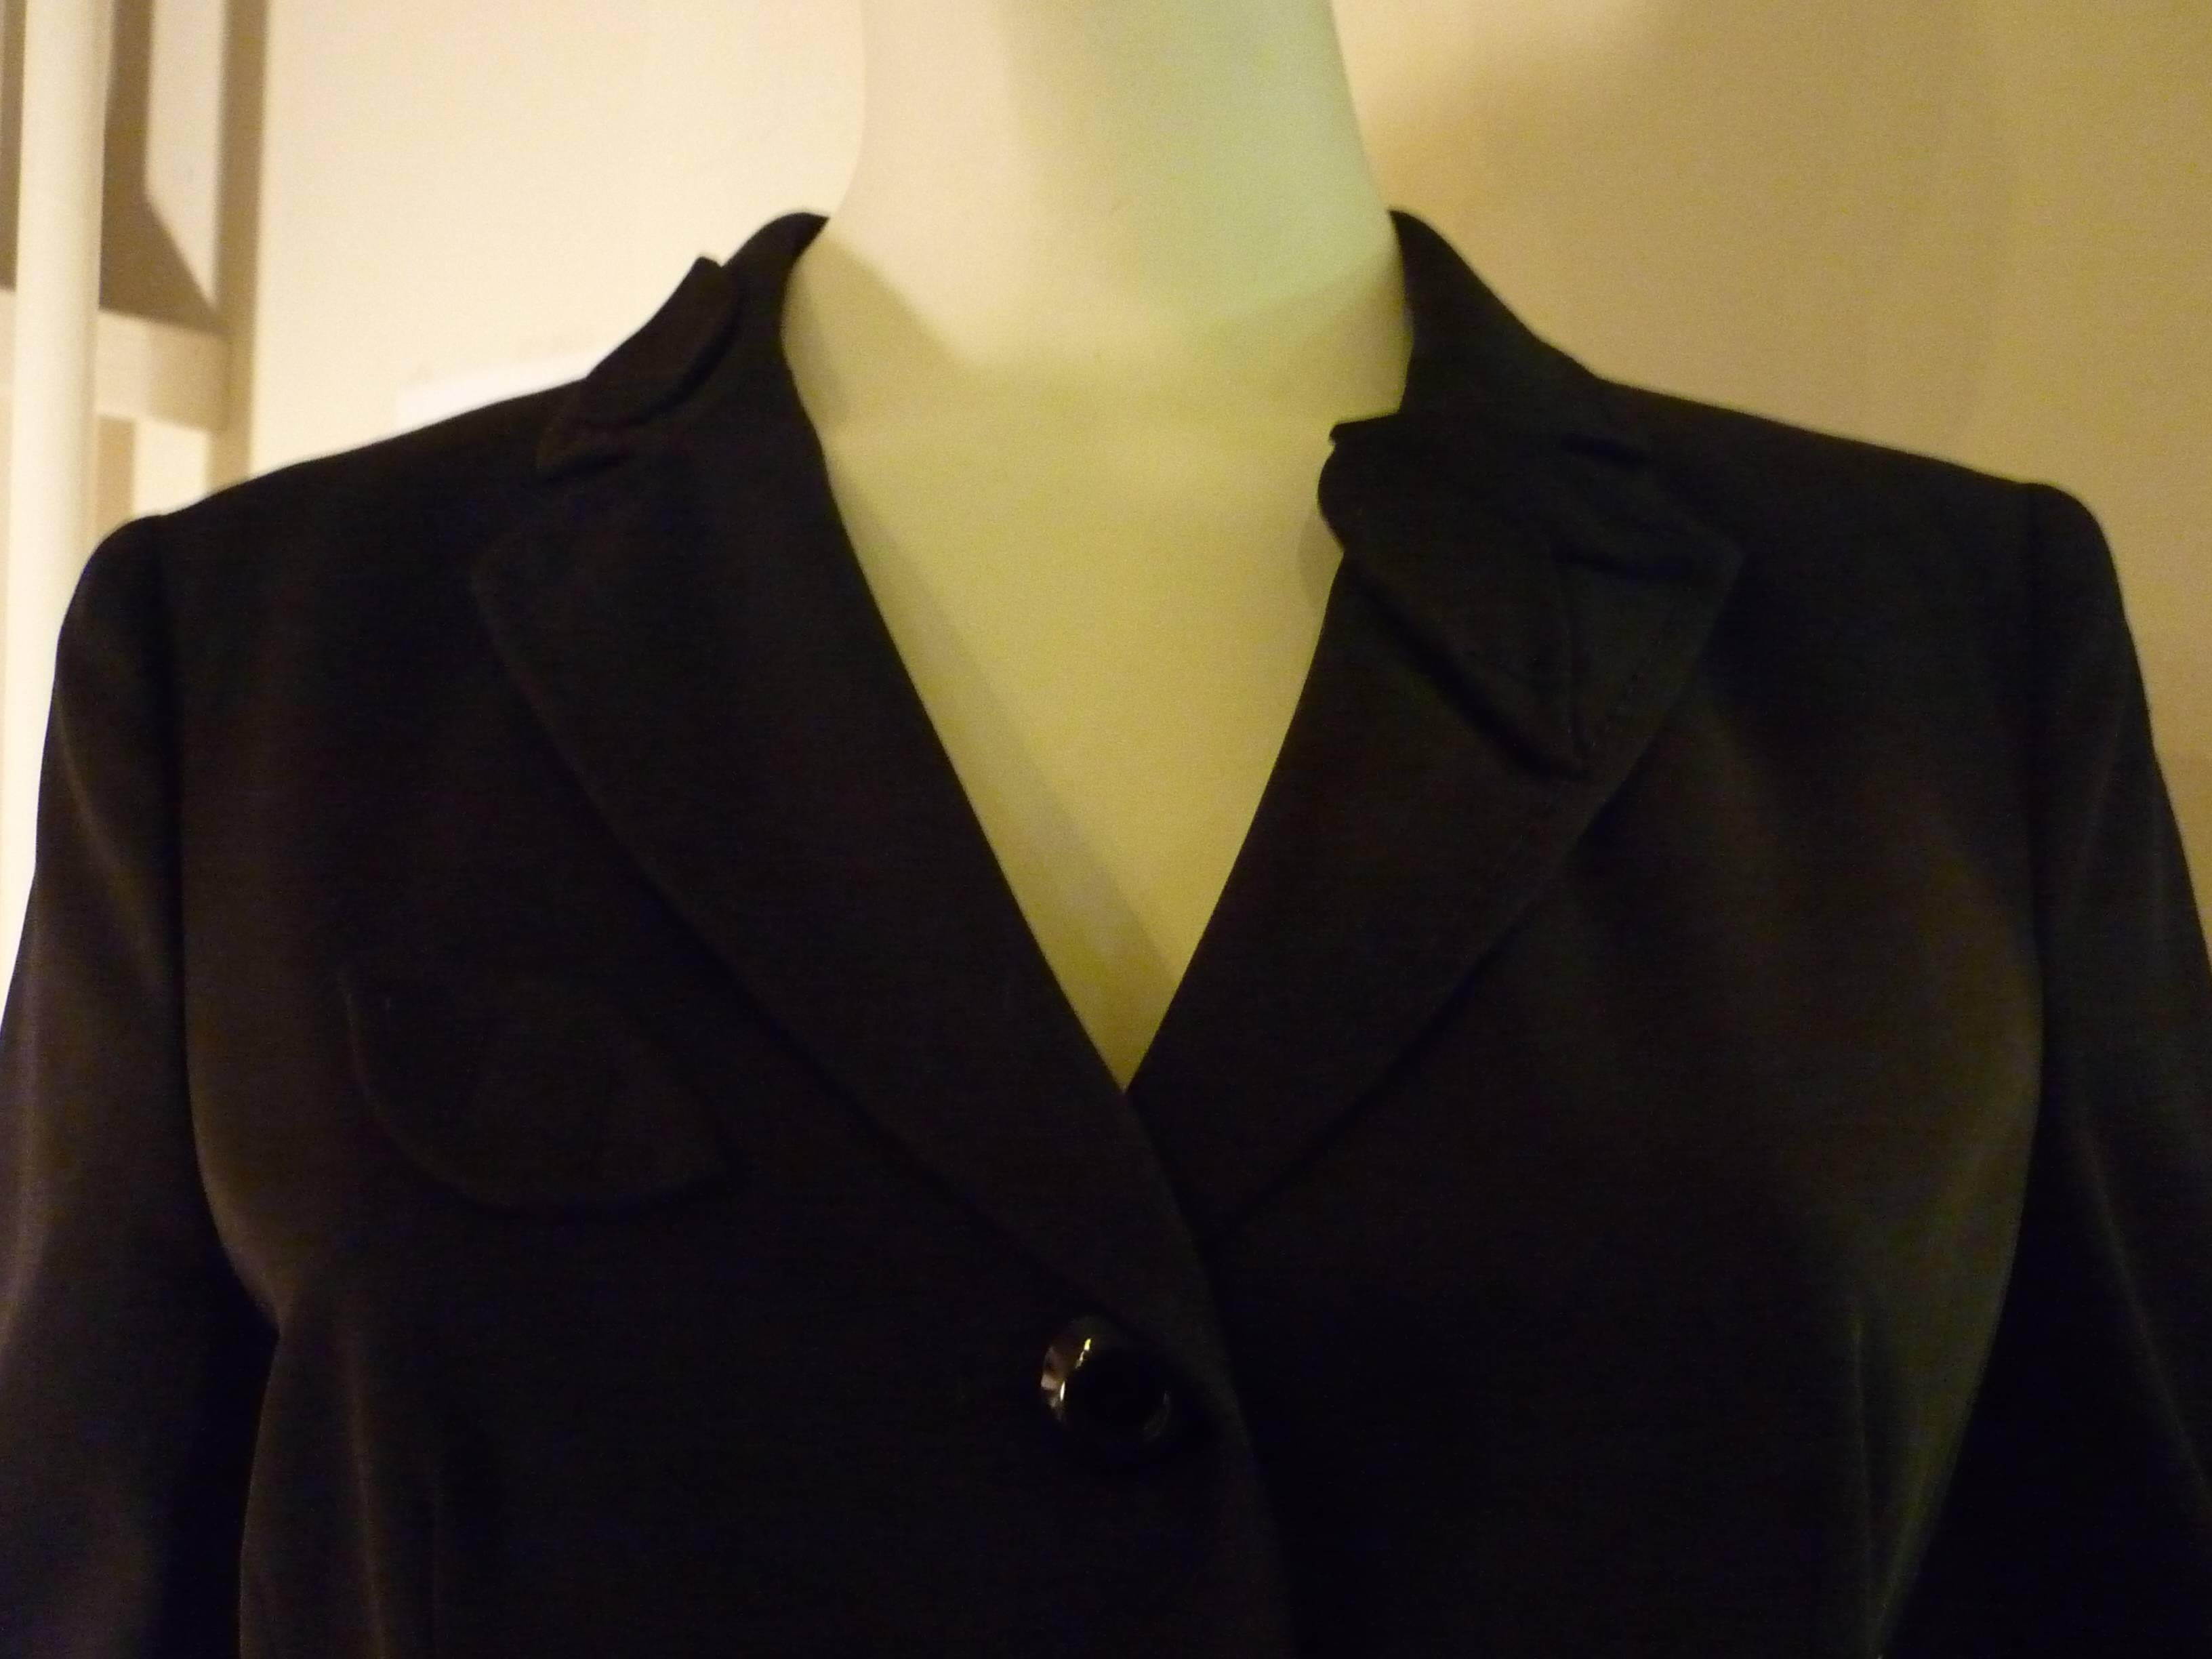 Beautifully cut and detailed light wool jacket, with stitching detail, darts and two fake slit pockets.

The jacket also a belt and nice striped lining.

A lovely blazer that would complemen many outfits.l